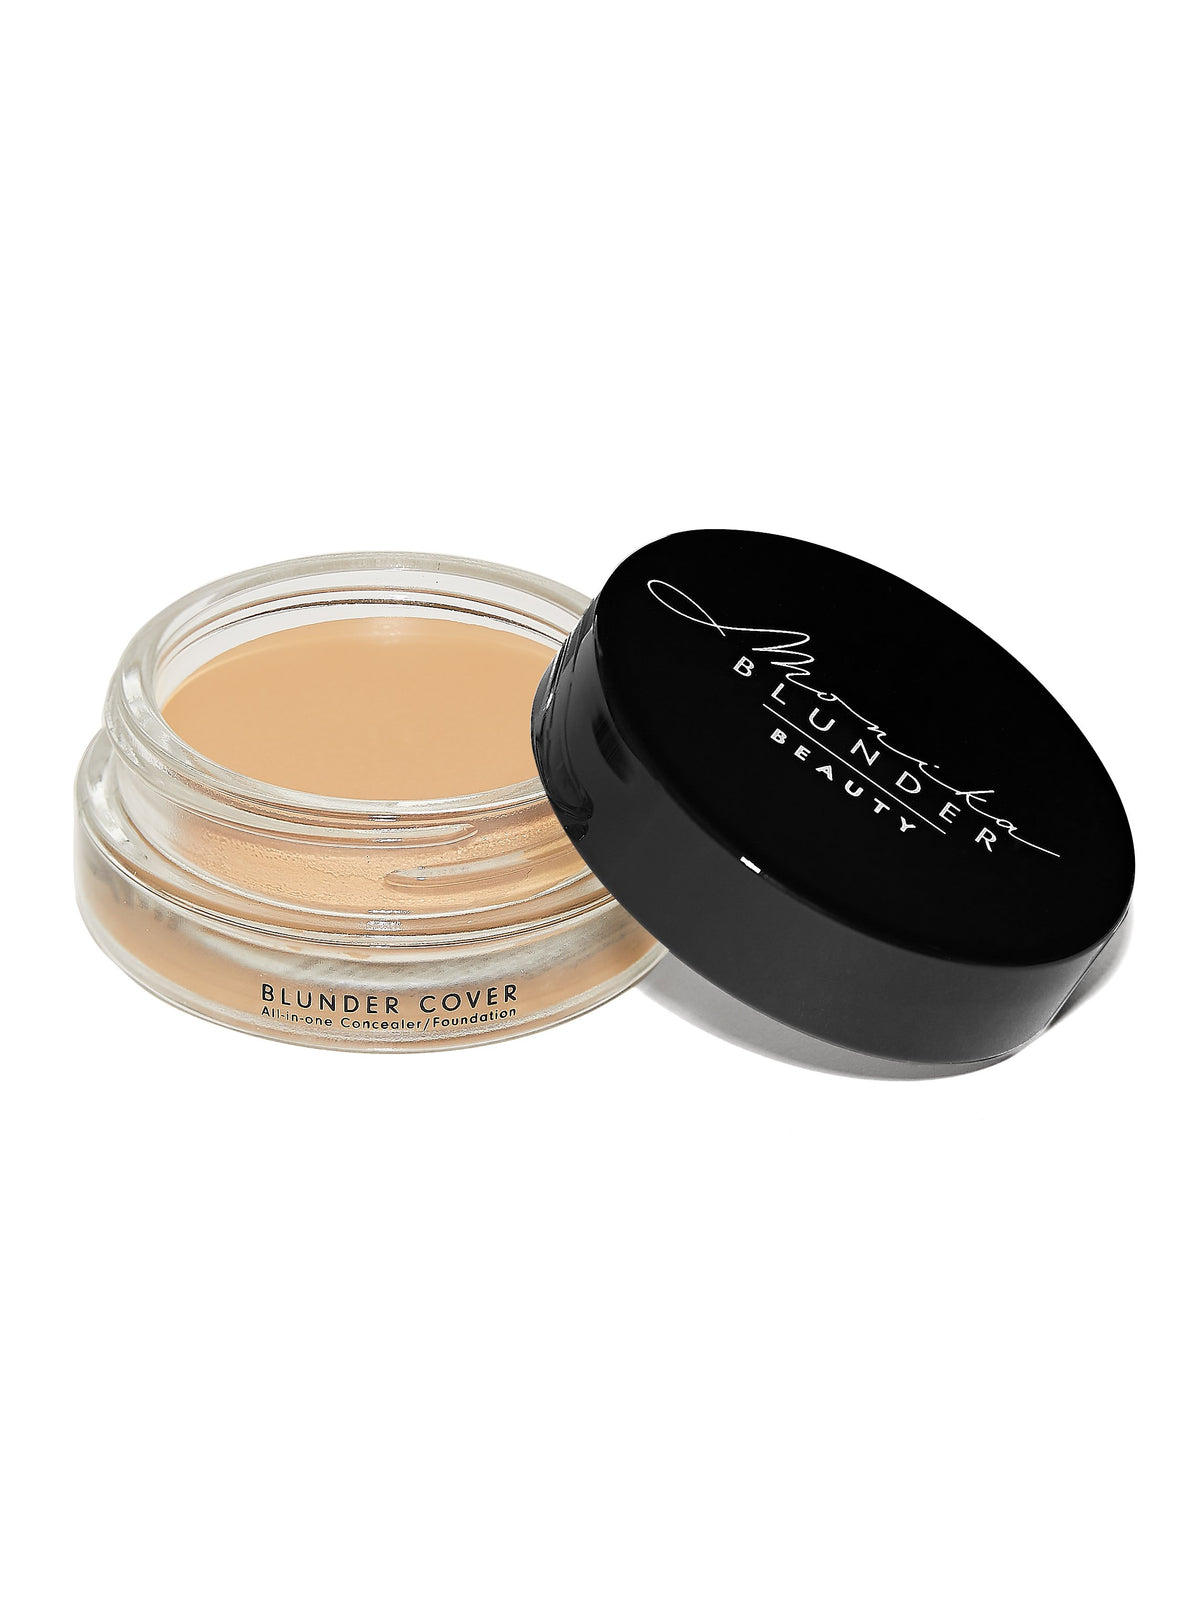 3.5 DREI.5 Blunder Cover All-in-One Concealer/ Foundation